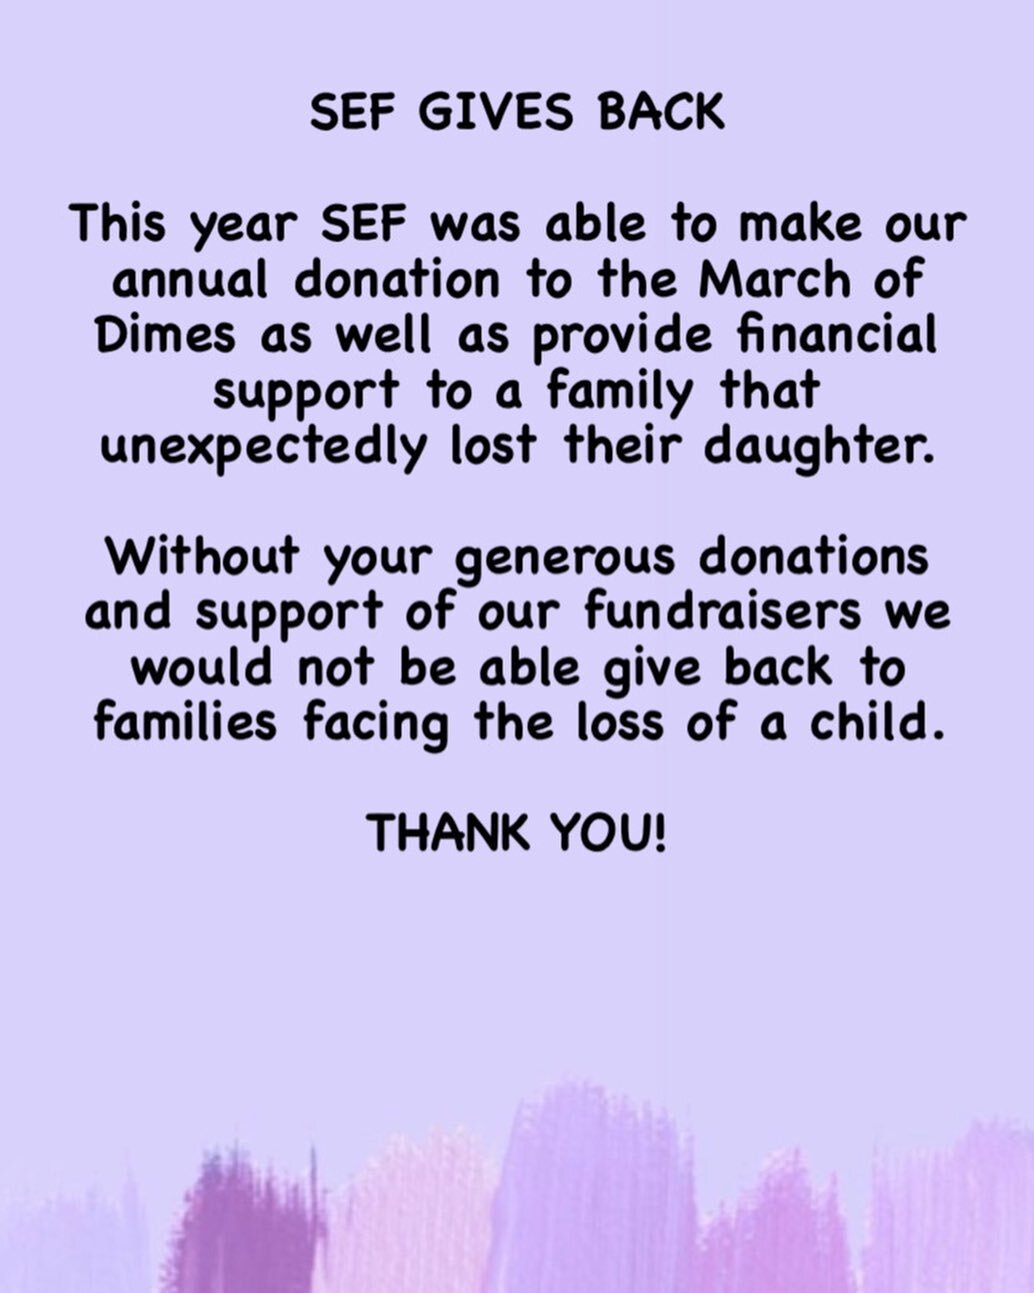 Though bittersweet, we feel privileged to be able to support families facing child loss. Thank YOU for helping us give to families that will endure this unimaginable loss 💜